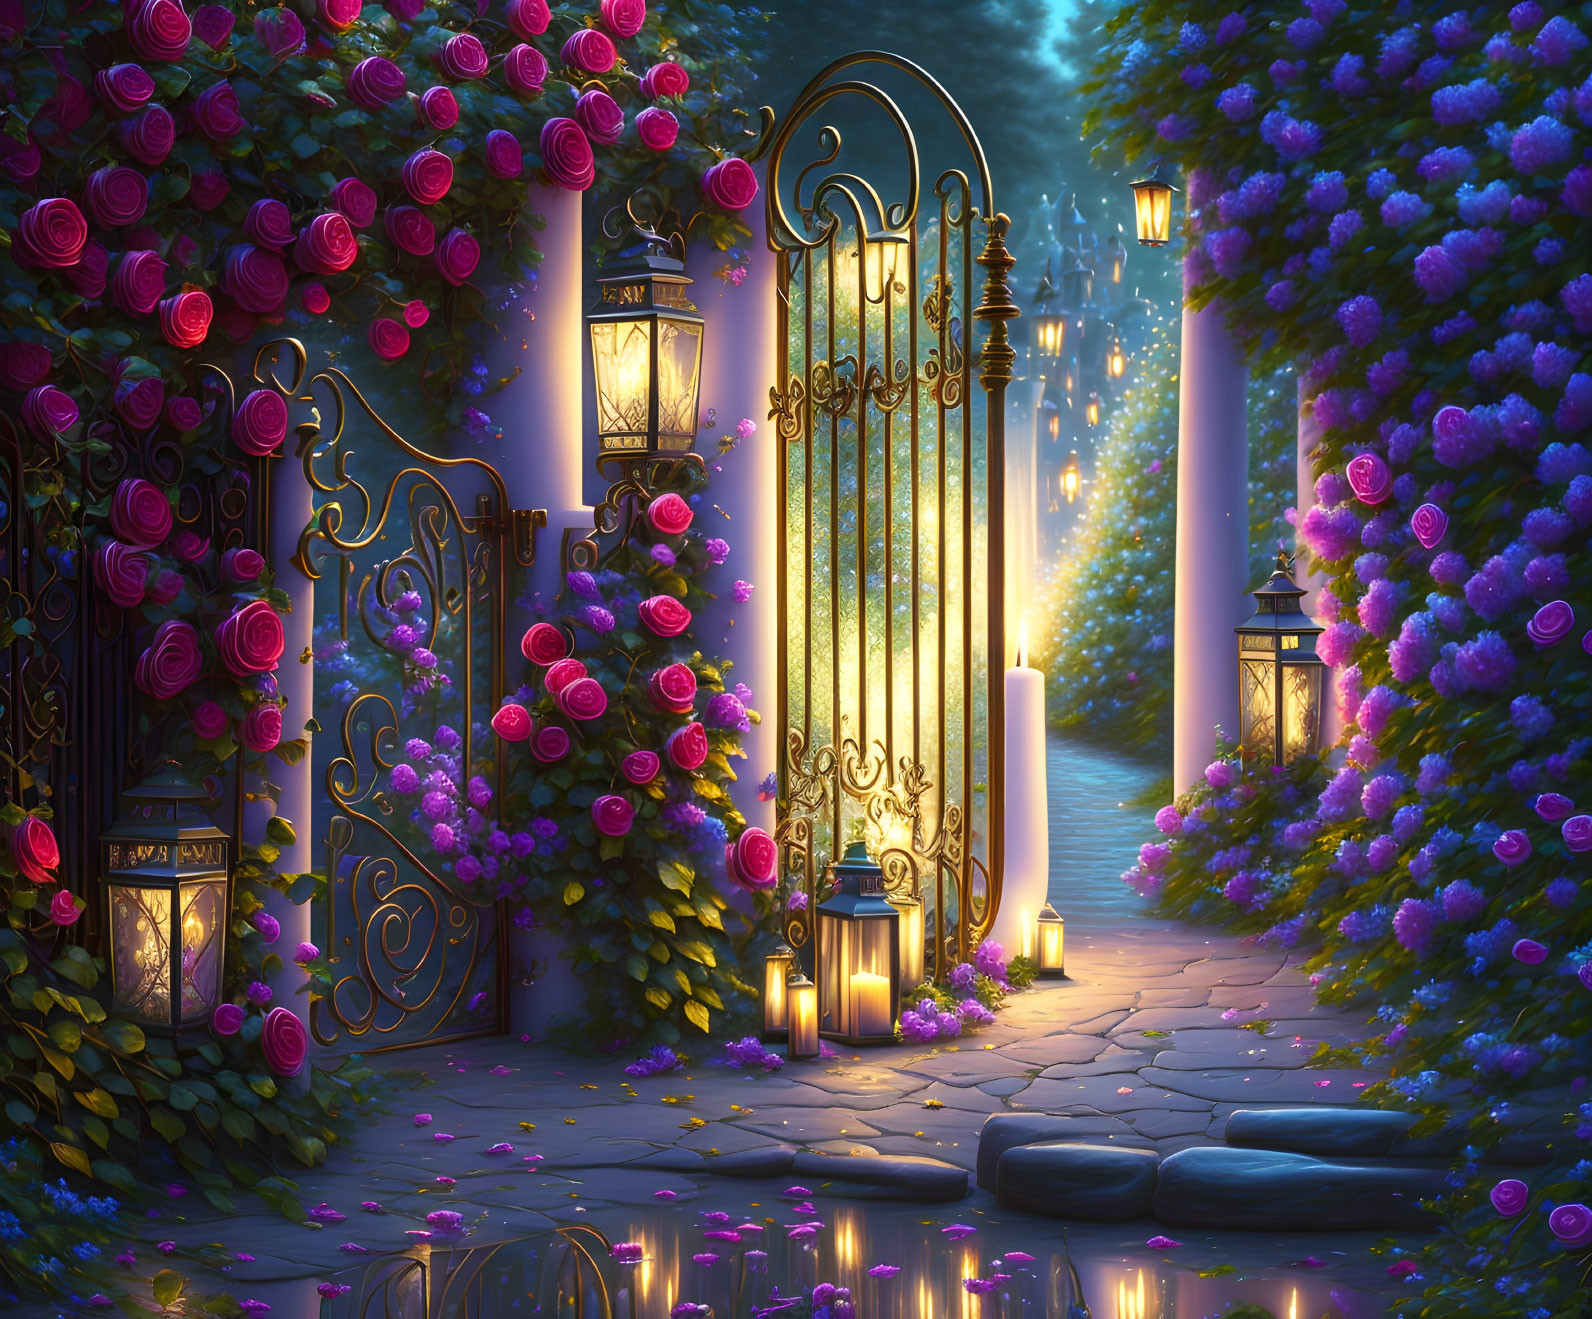 Golden gate with roses in magical nighttime garden with lanterns and purple foliage